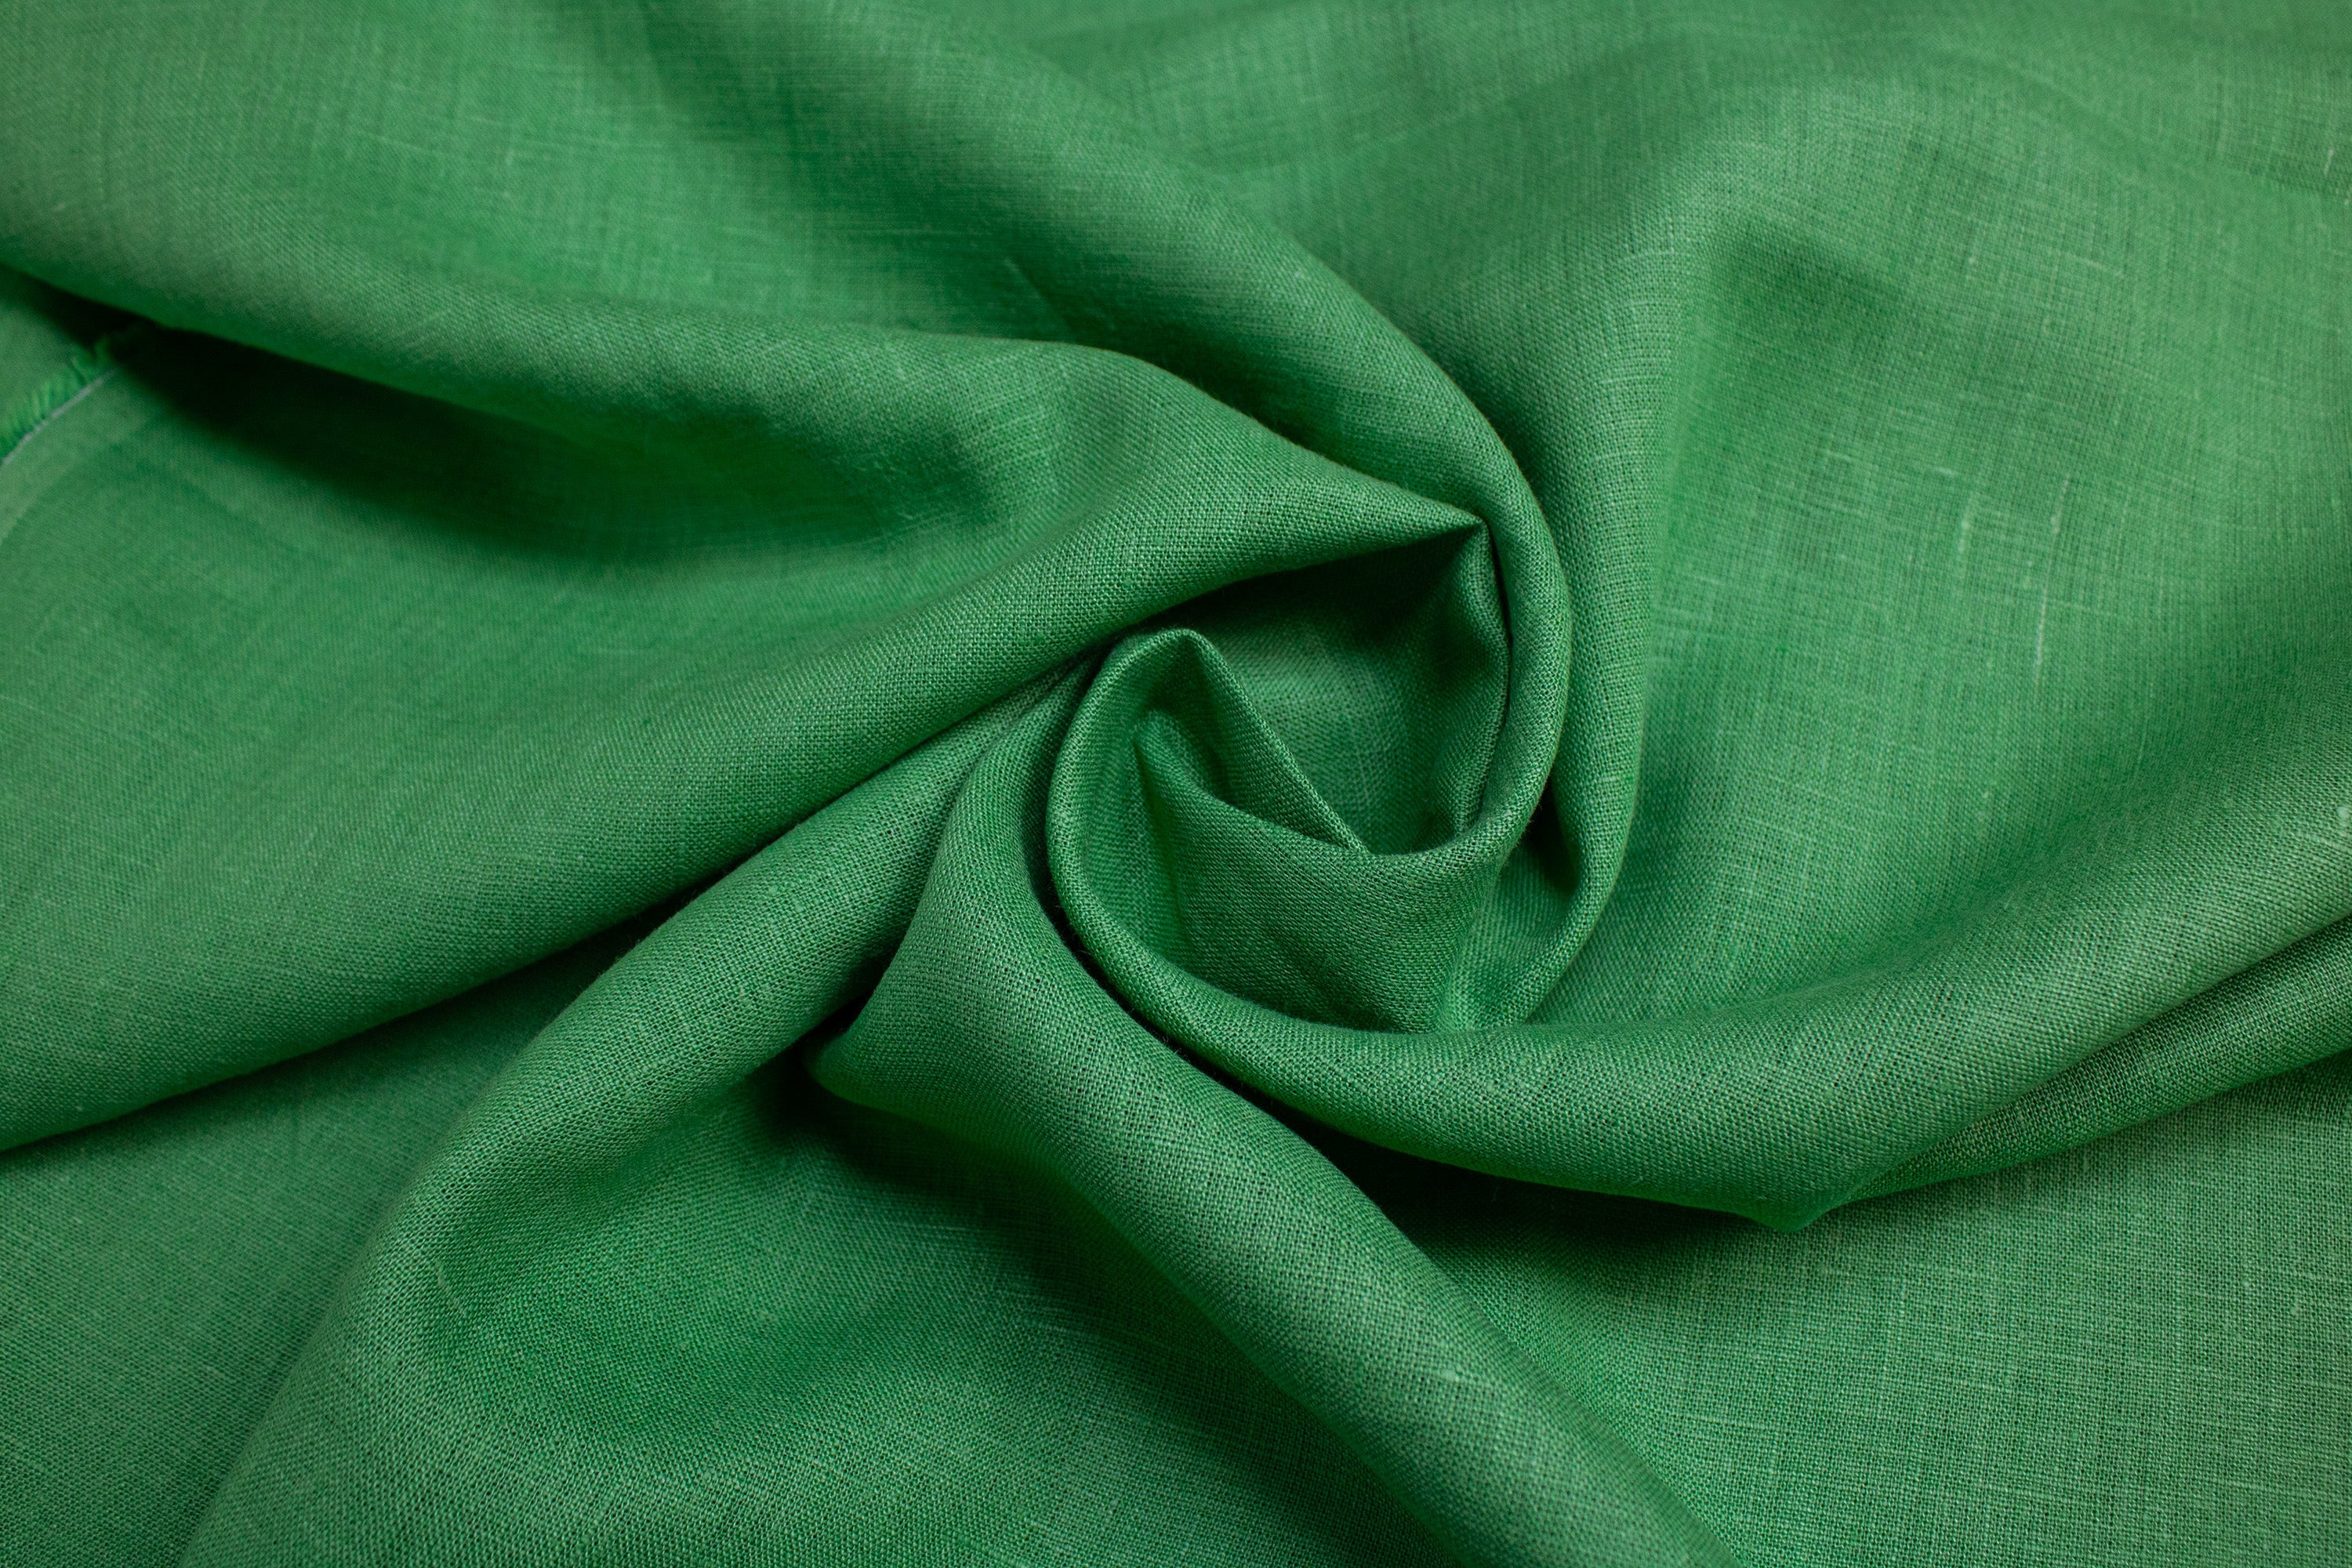 Luca-S Pure Natural 100% Linen Soft Fabric Grass Green Color